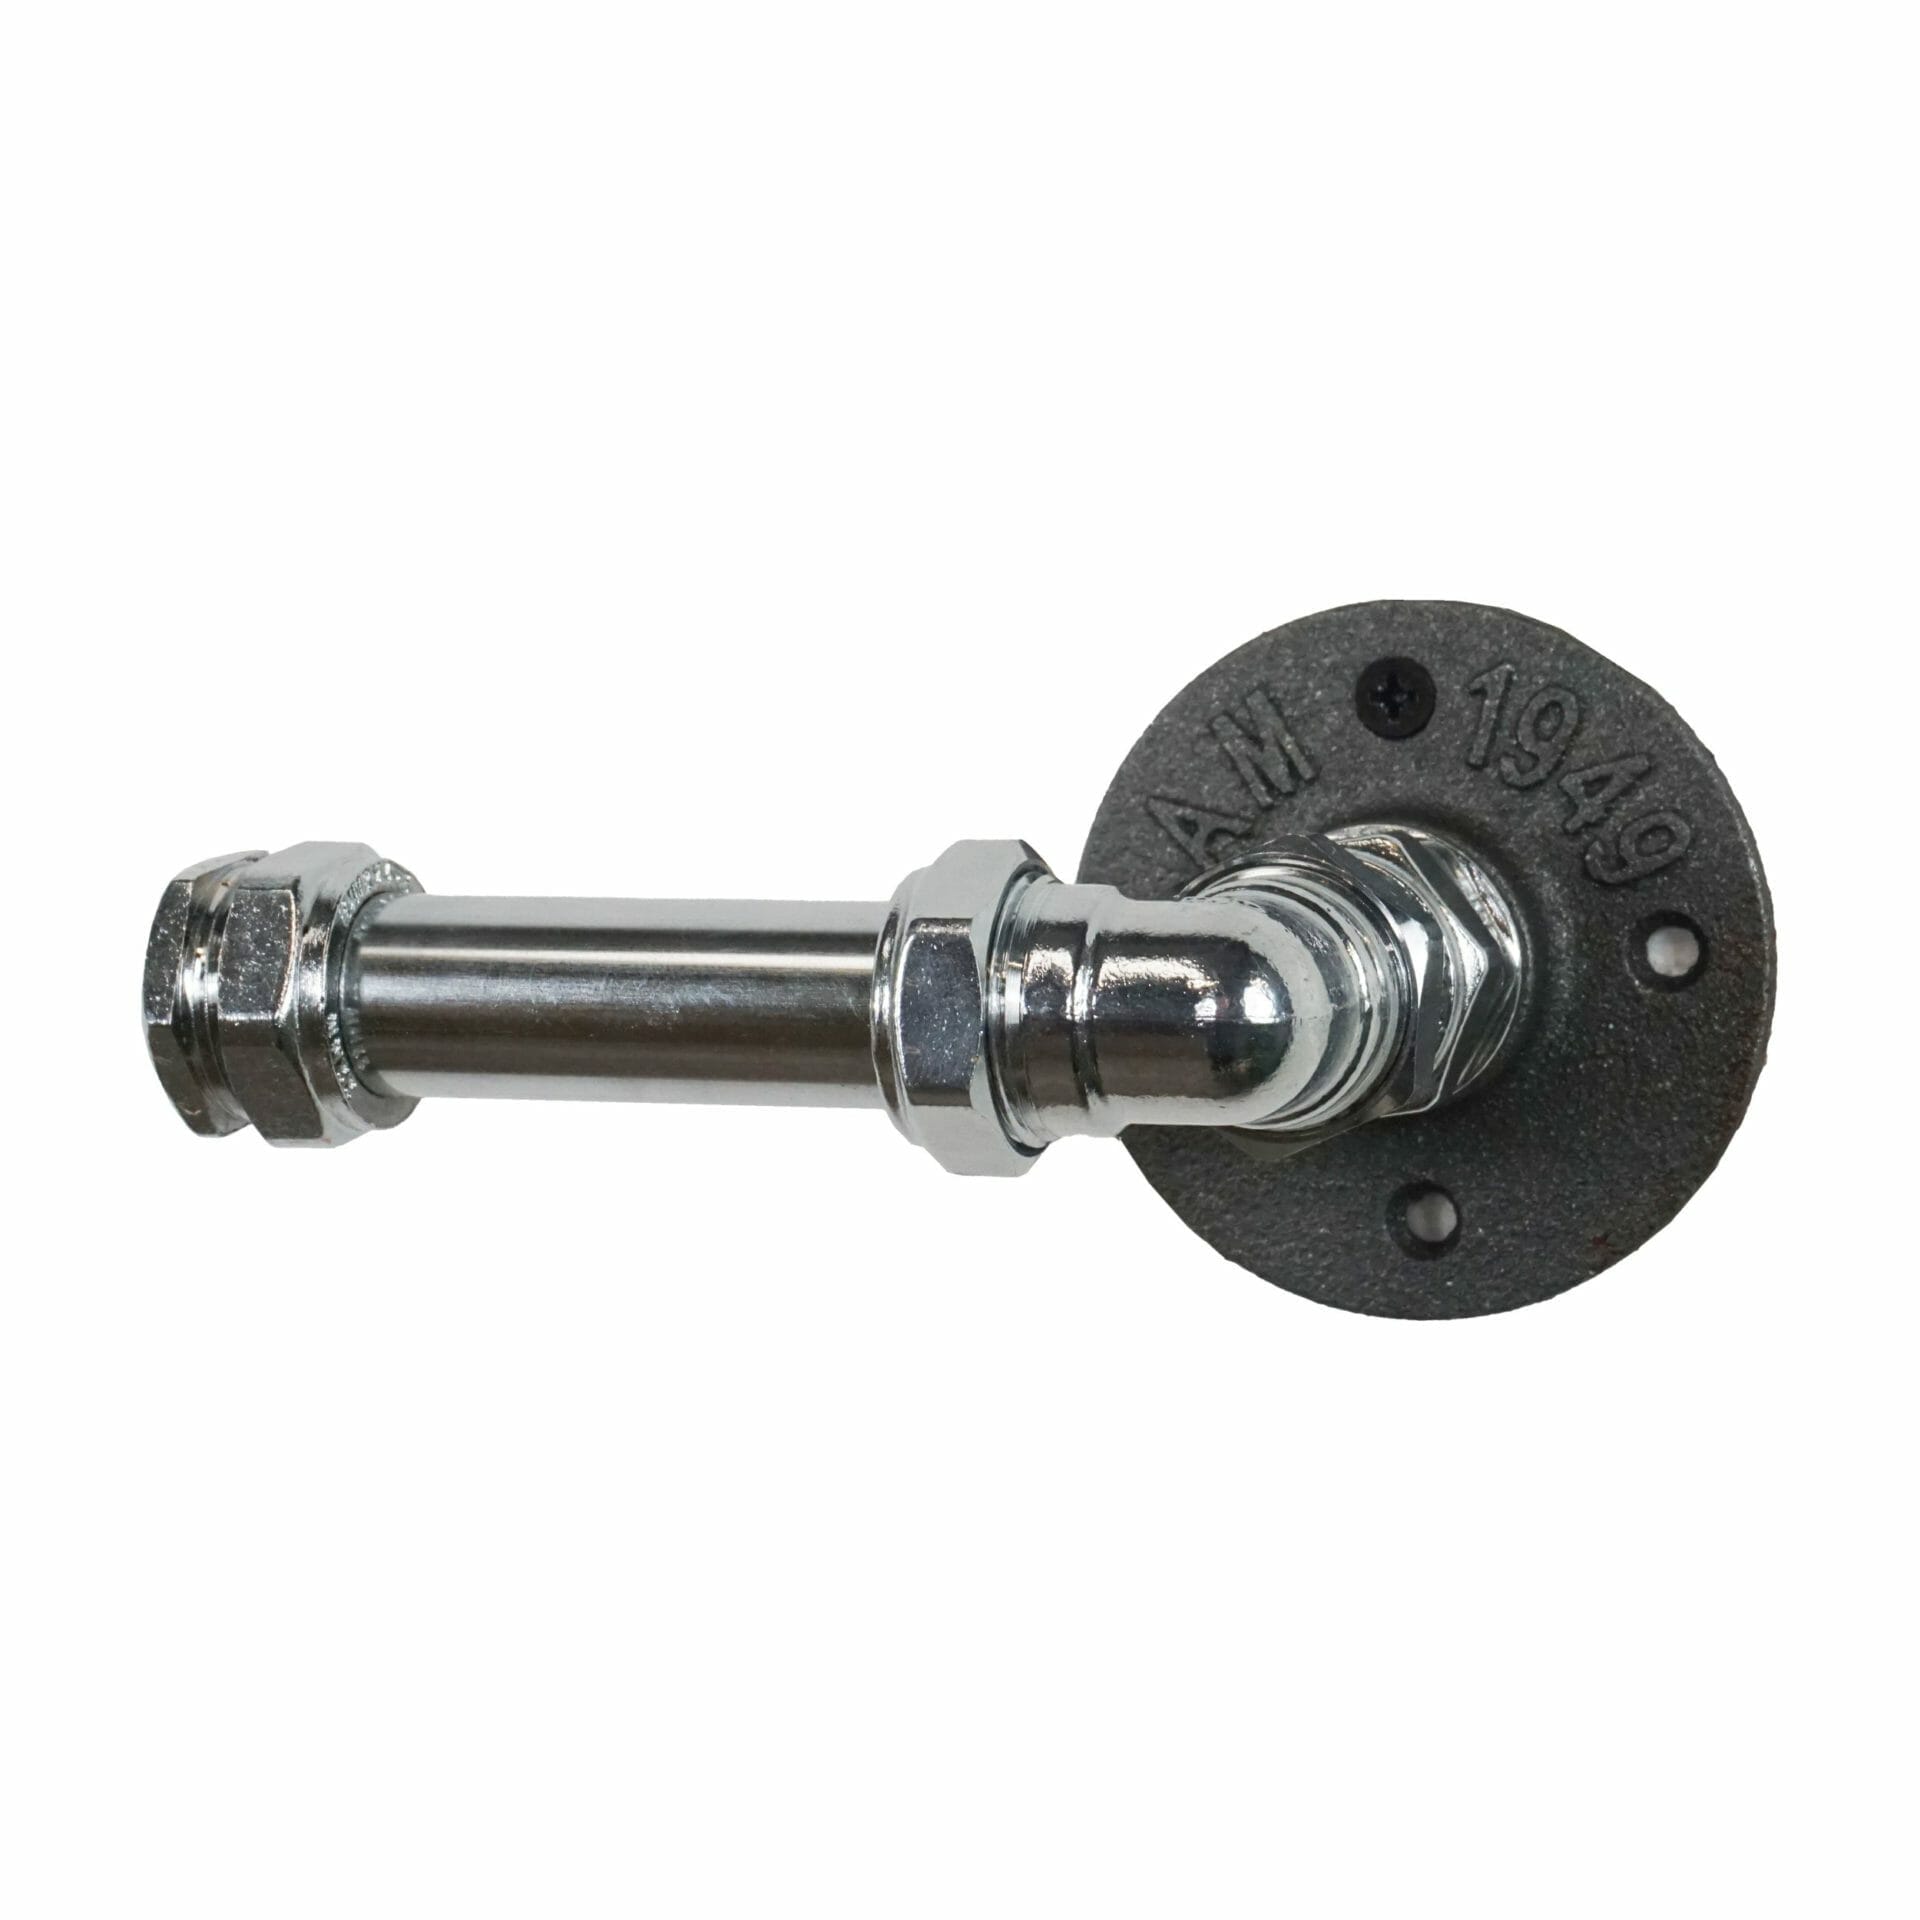 Stainless steel industrial pipe door handle with raw steel fitting